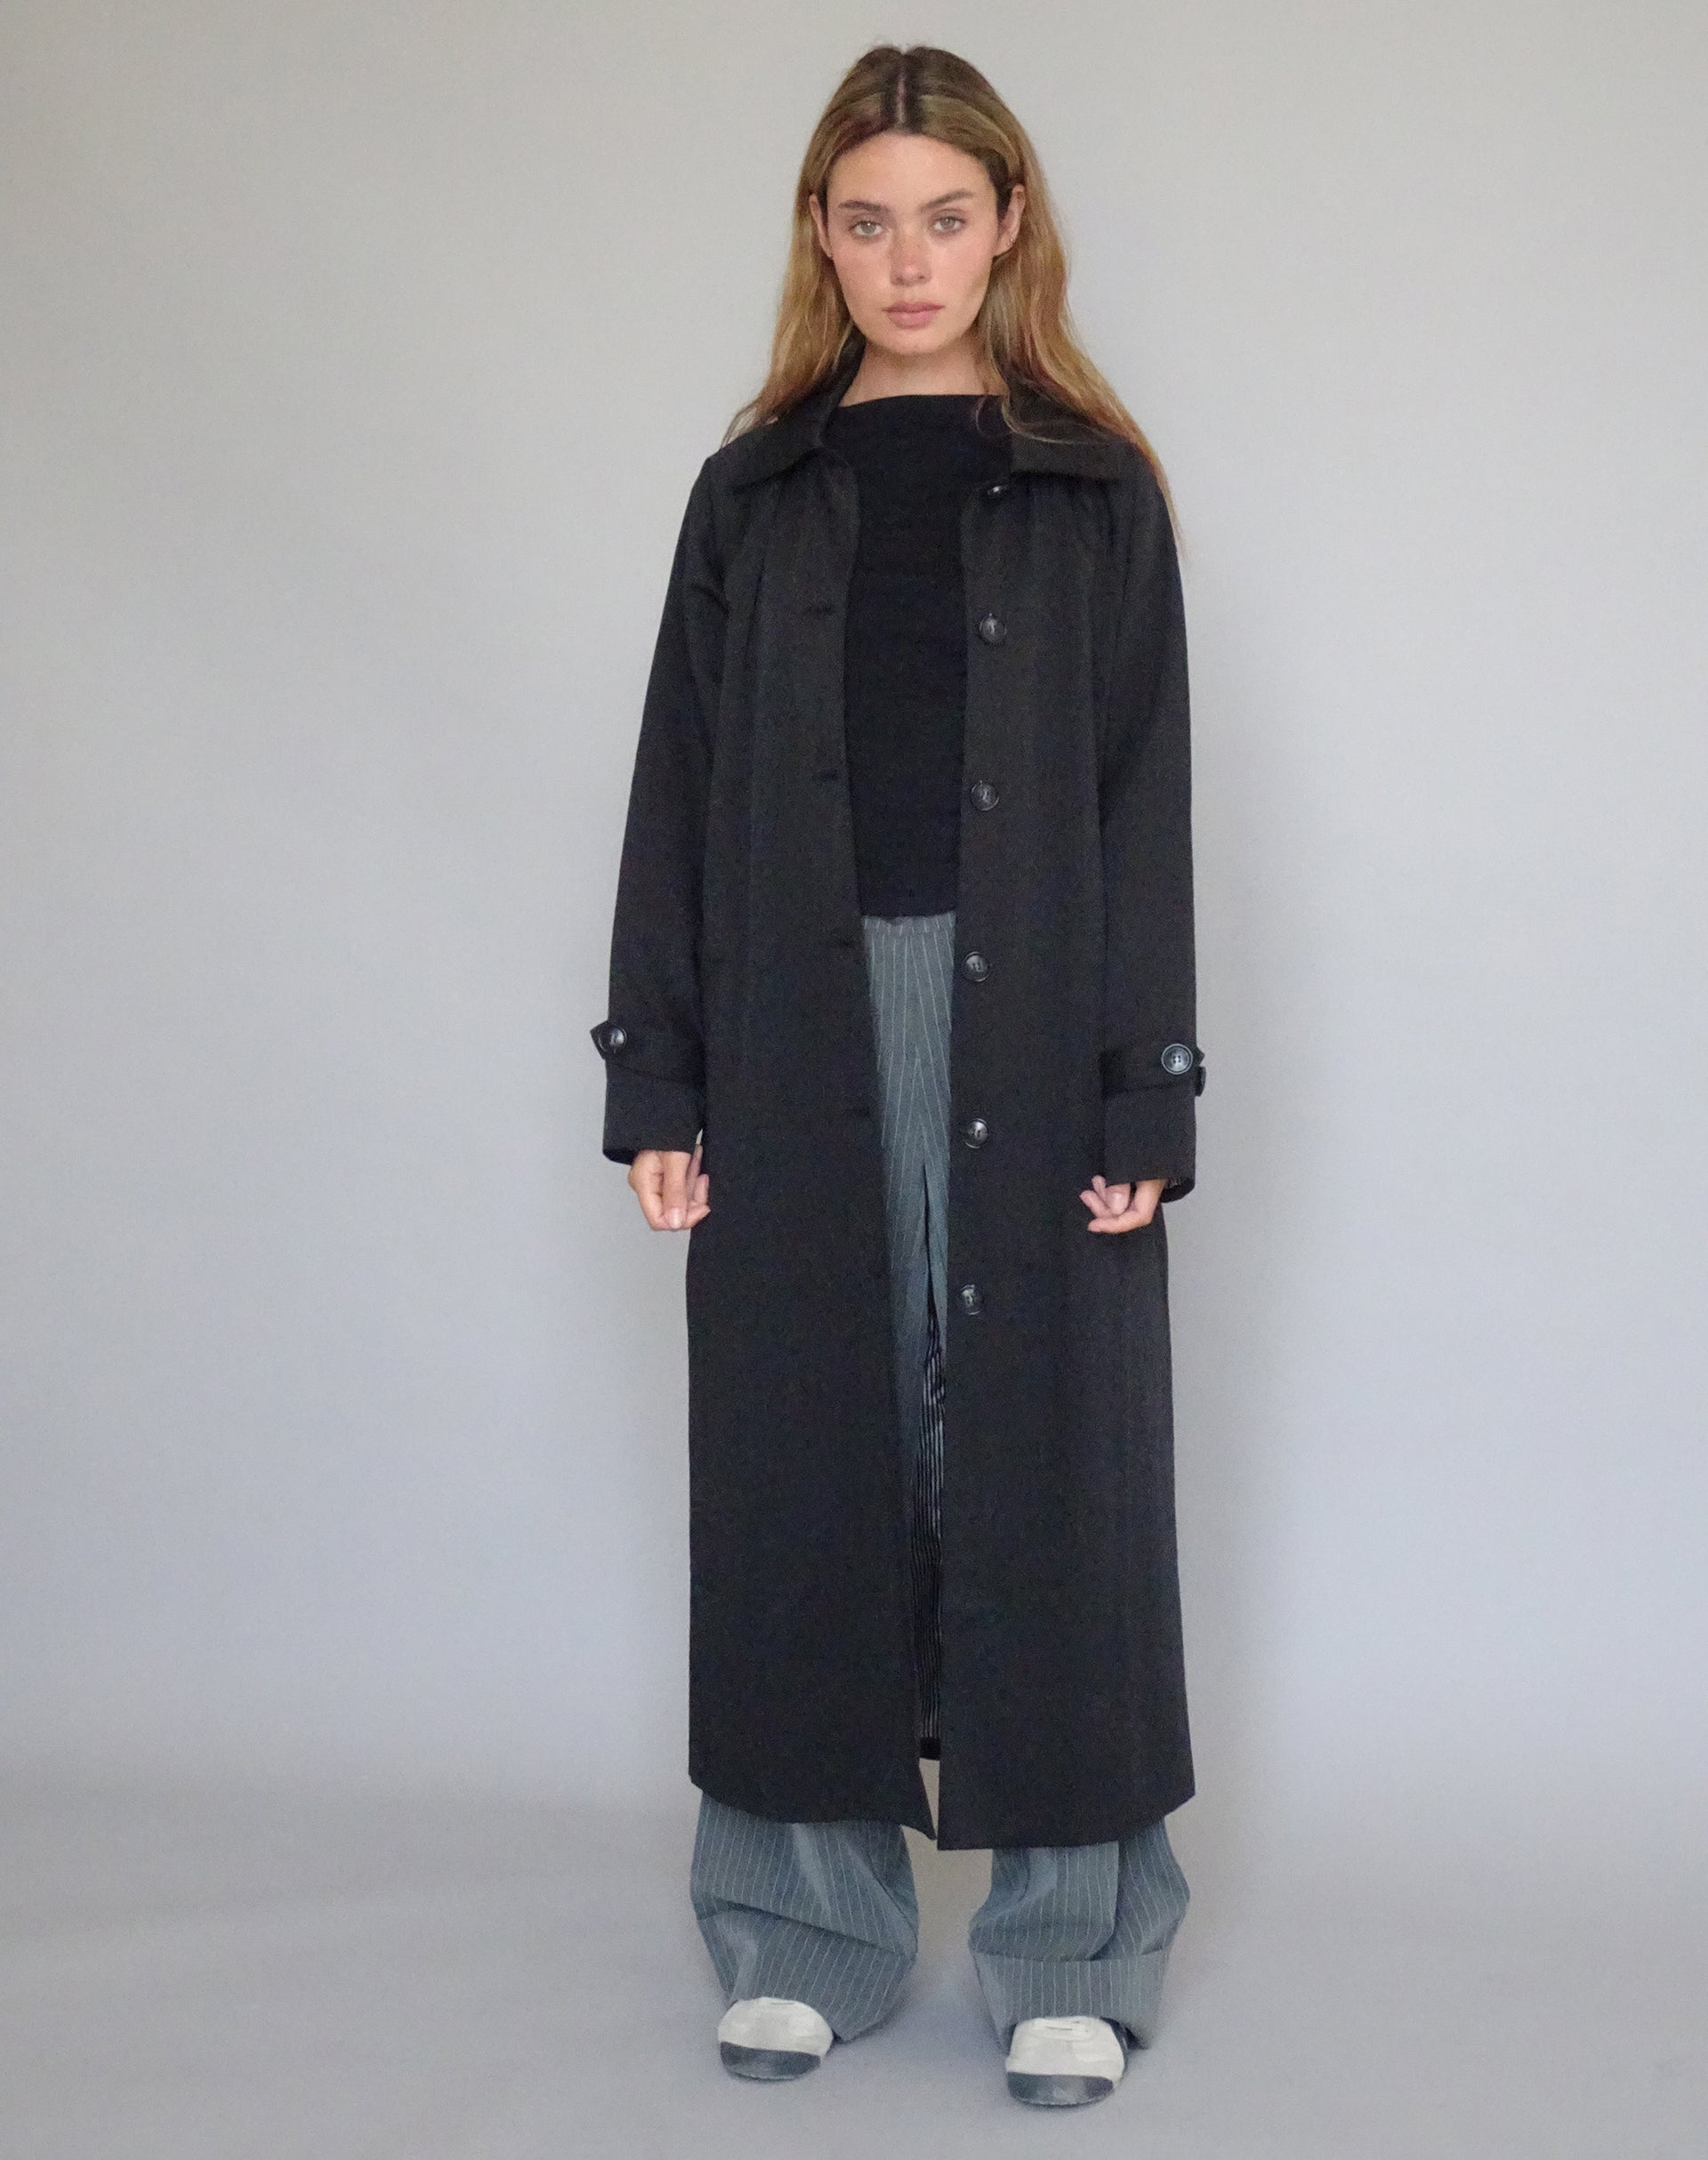 Image of Assa Trench Coat in Black with Stripe Lining